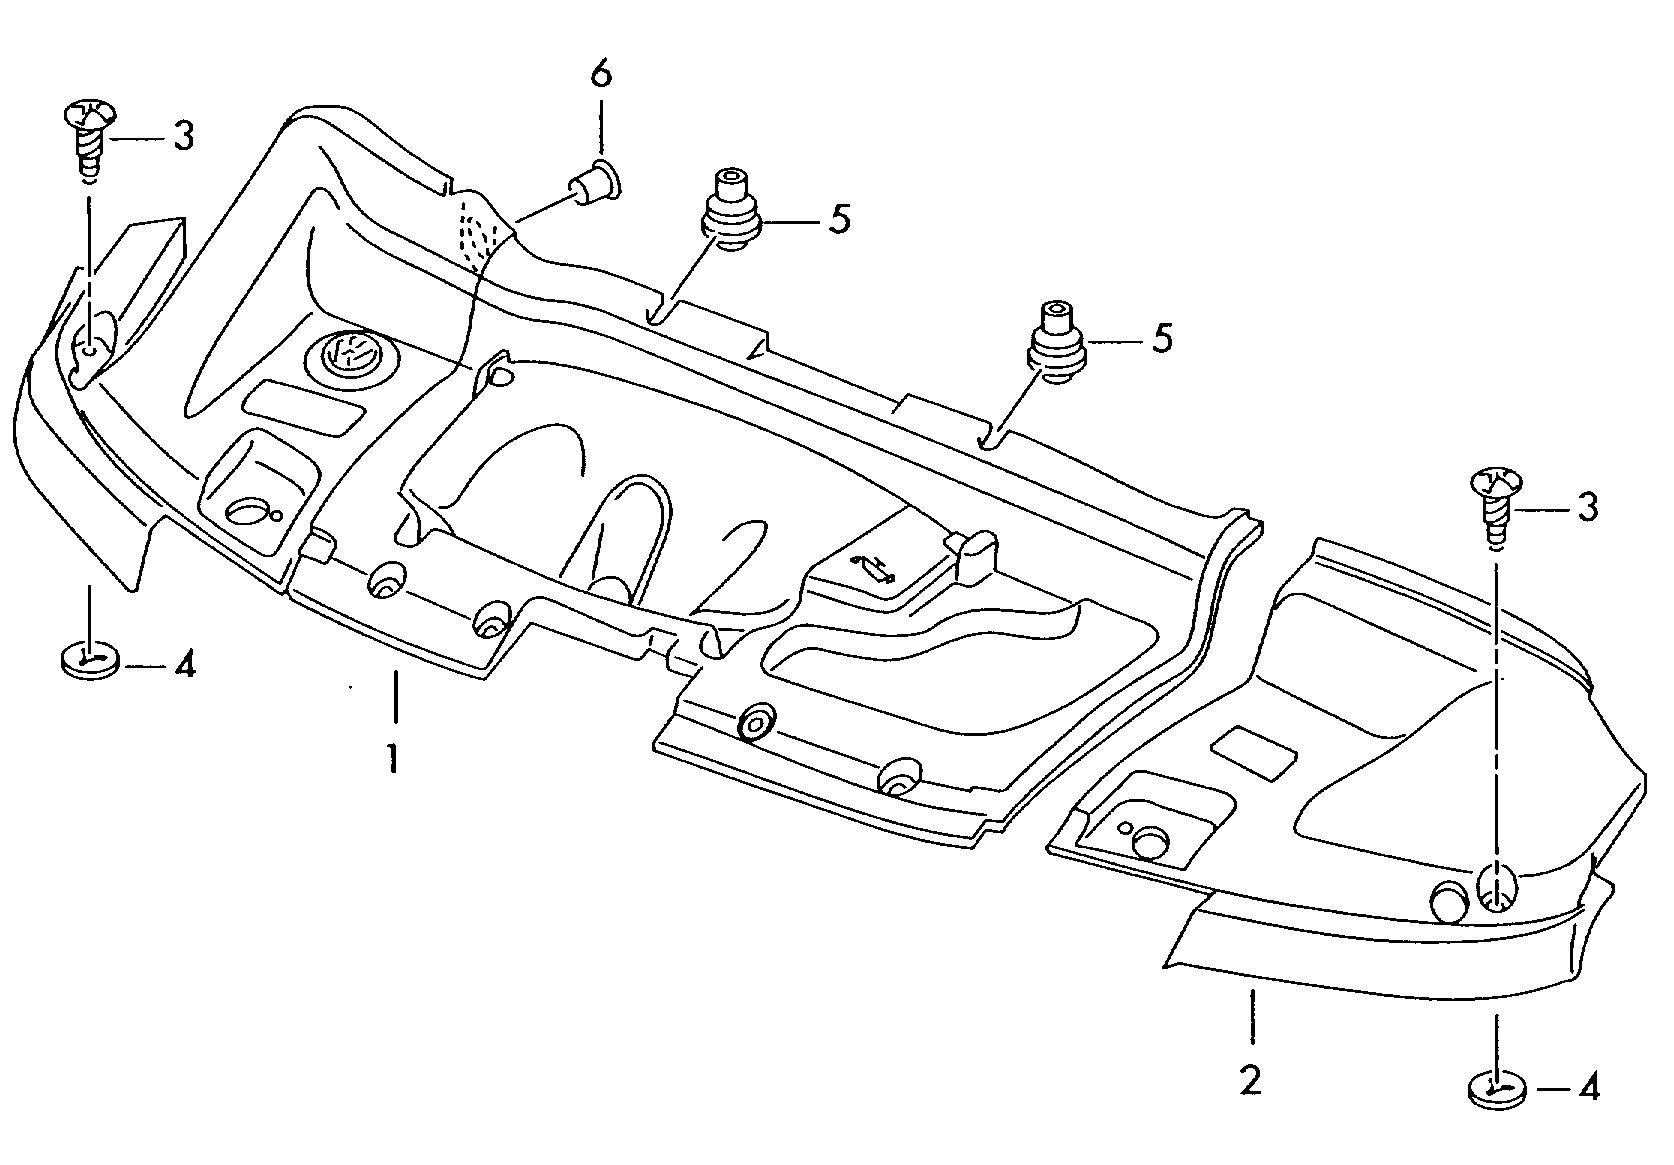 cover for engine compartment  - Transporter - tr